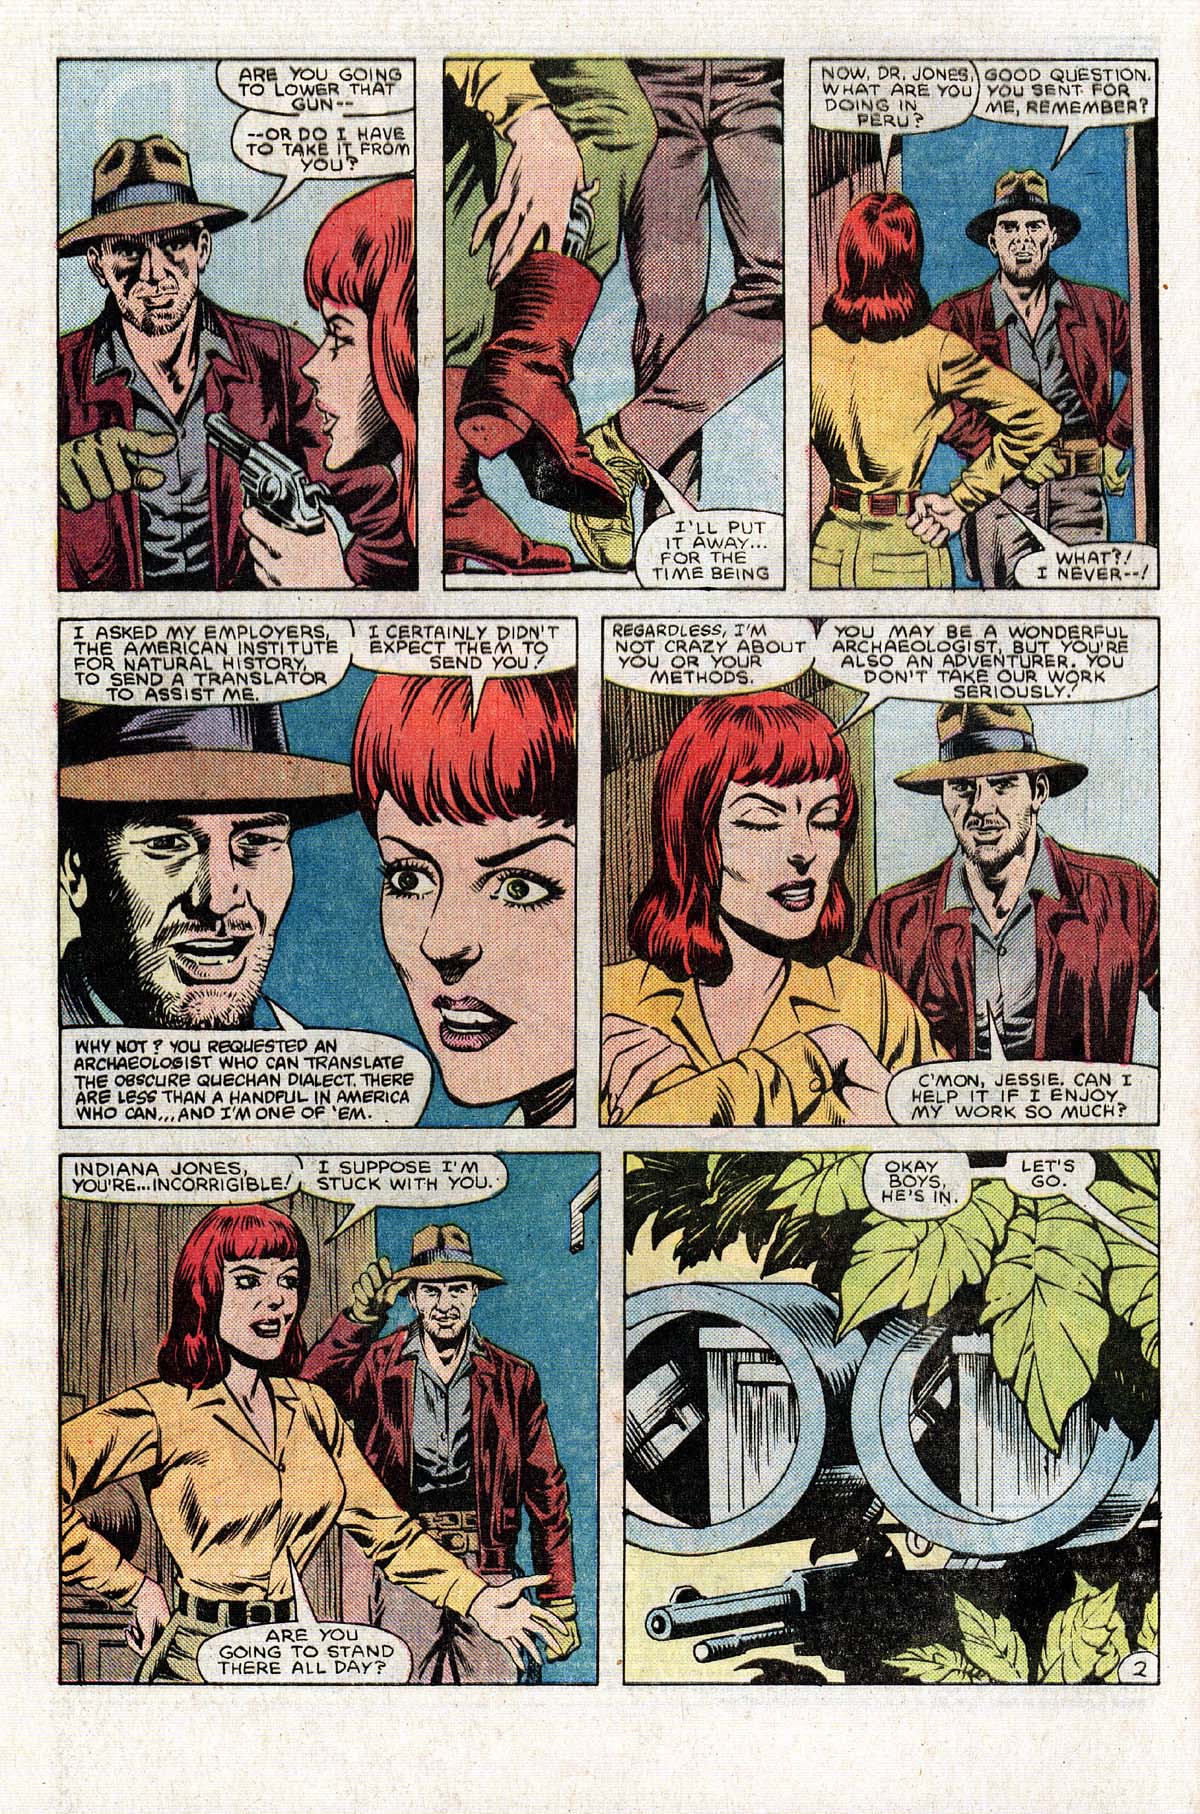 The Further Adventures of Indiana Jones 25 Page 3